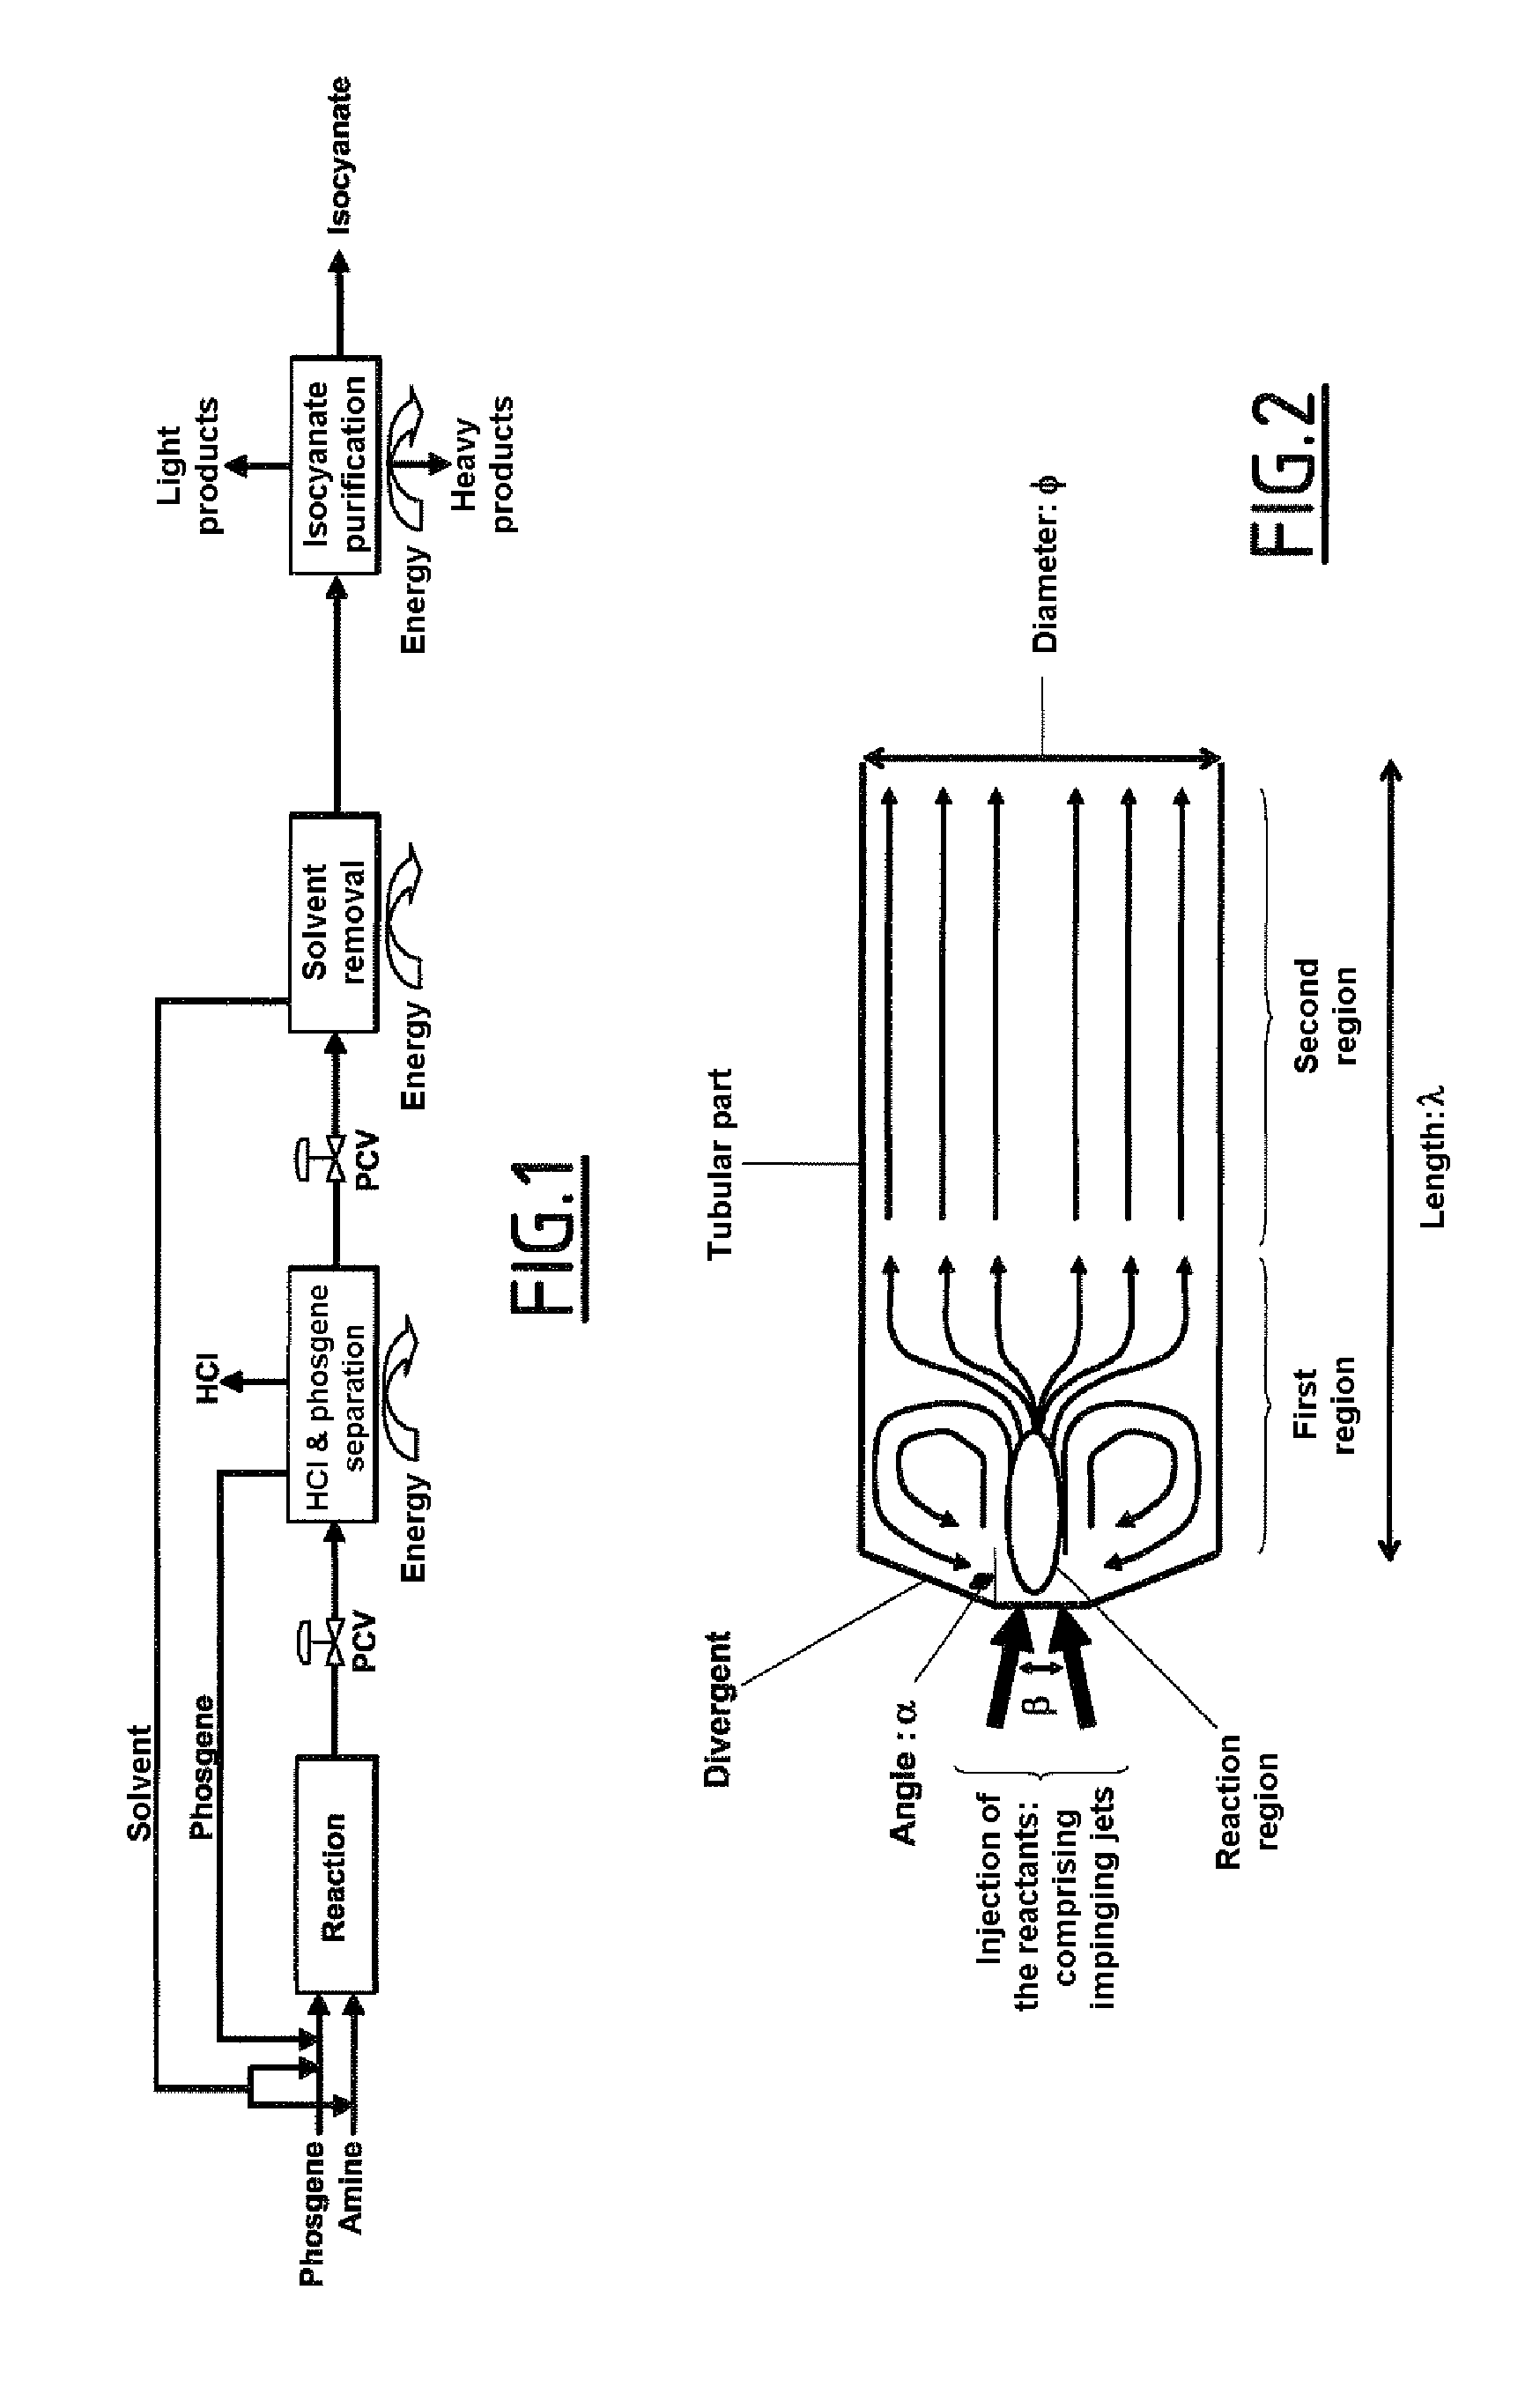 Use of a piston reactor to implement a phosgenation process